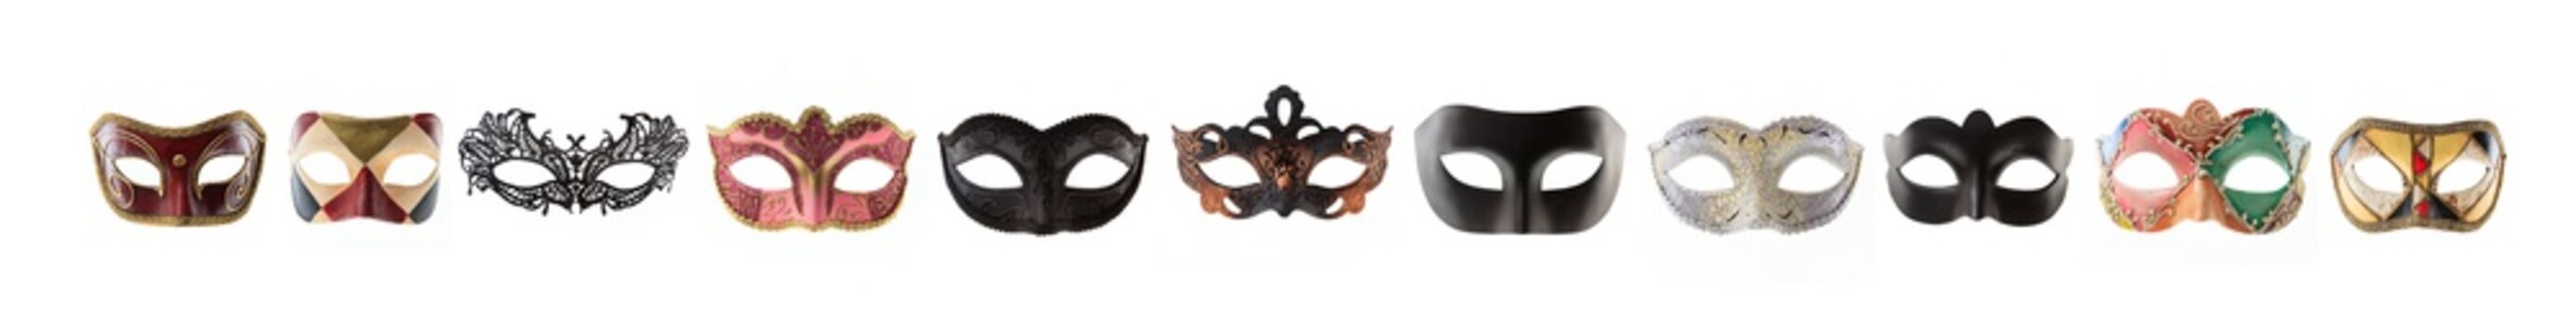 Carnival masks collage isolated on white background